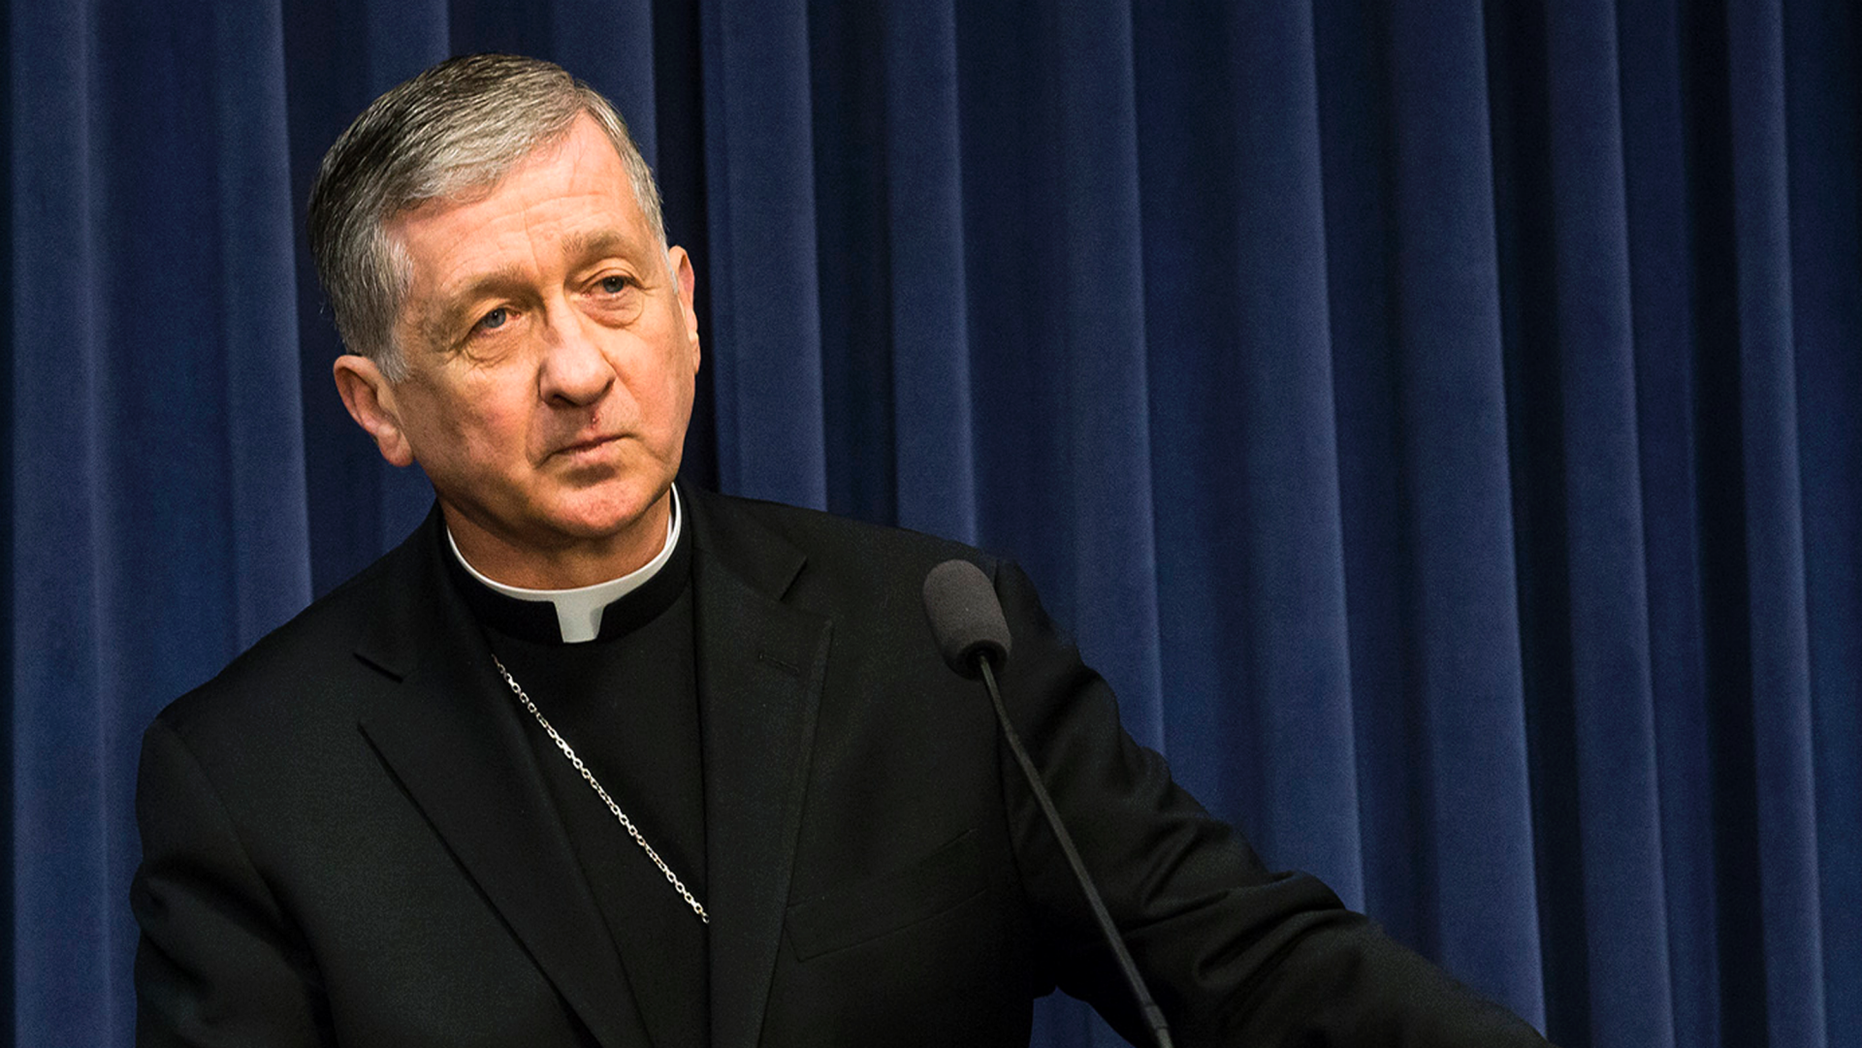 US Catholic bishops to pray over clergy sexual abuse scandal